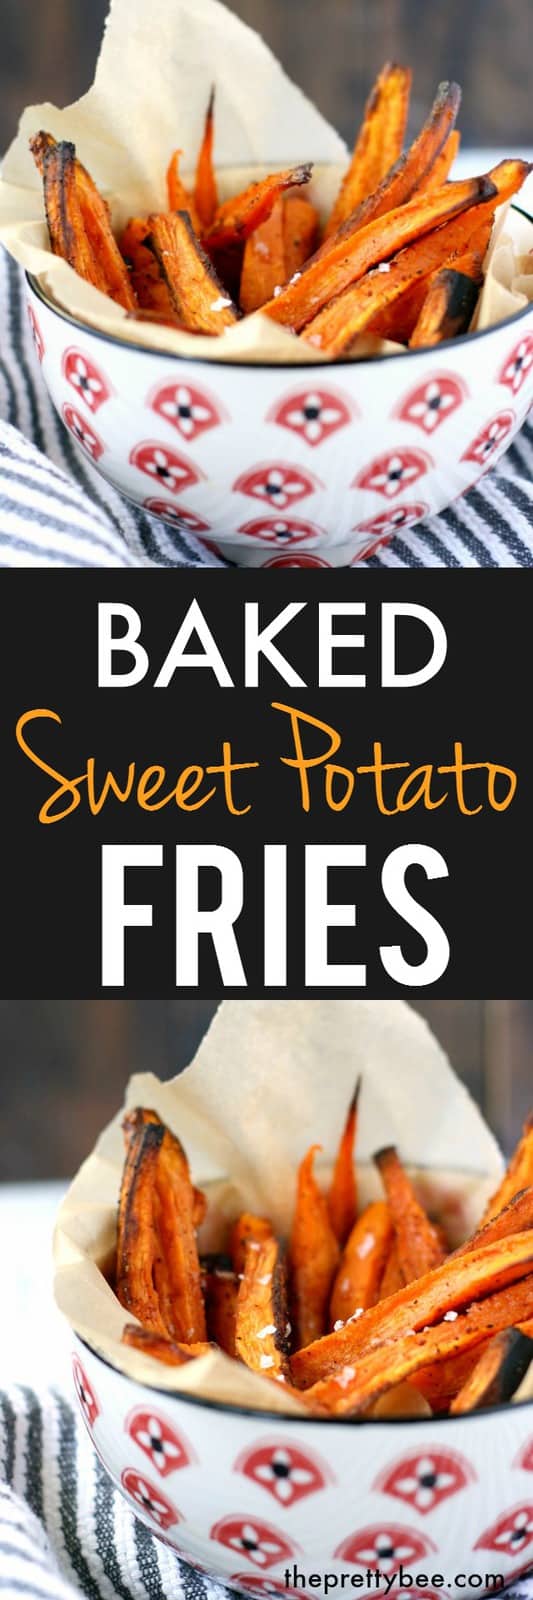 Simple, healthy, delicious sweet potato fries.